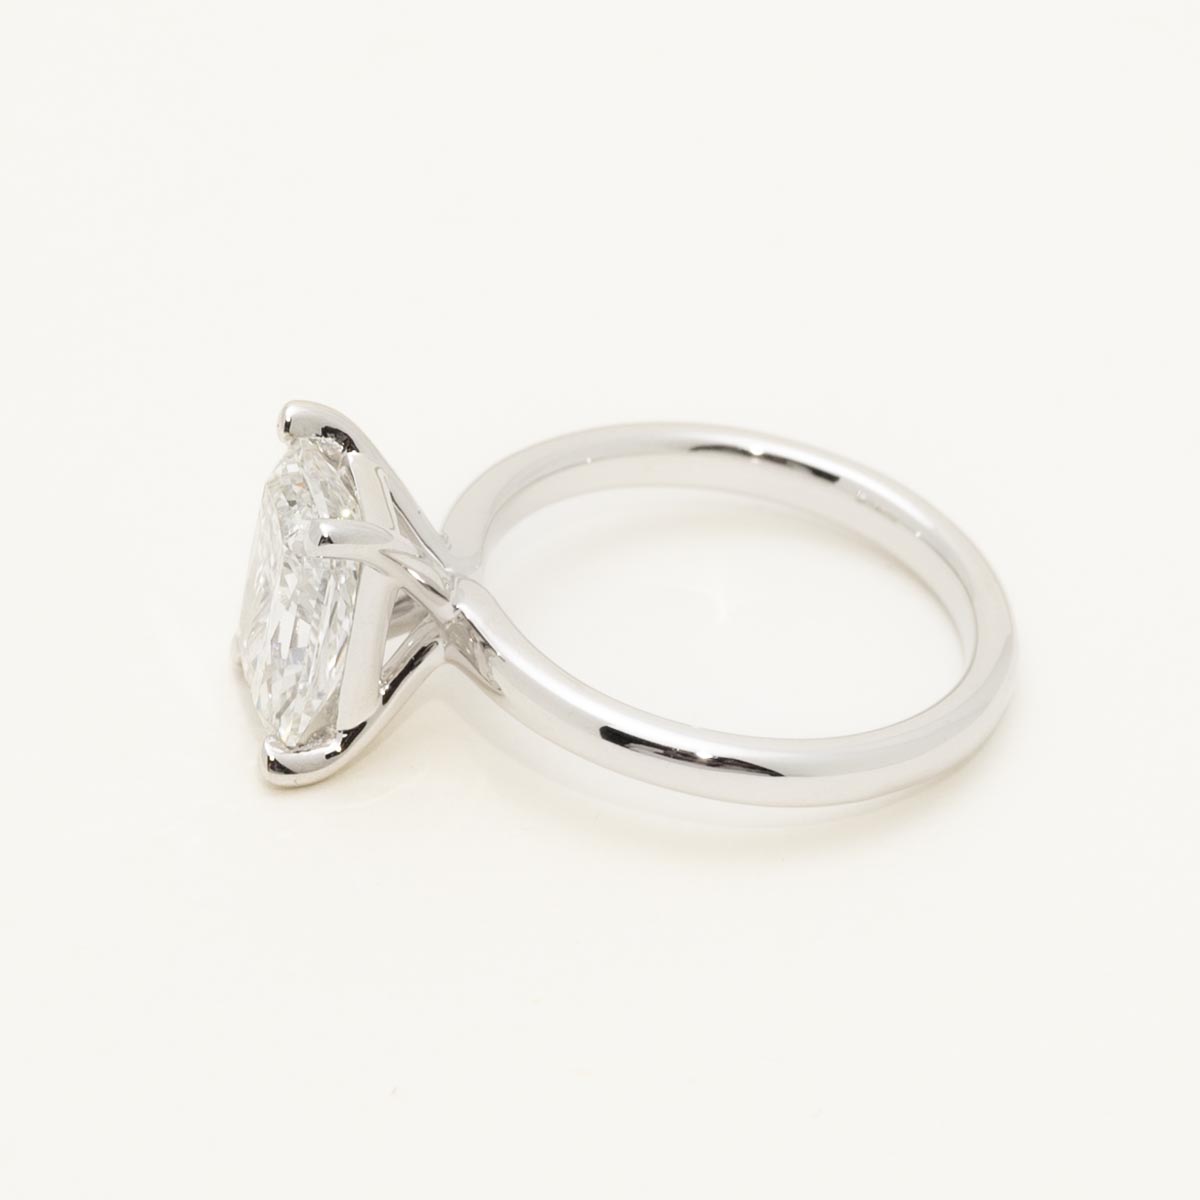 Lab Grown Radiant Cut Diamond Solitaire Ring in 14kt White Gold (3ct)